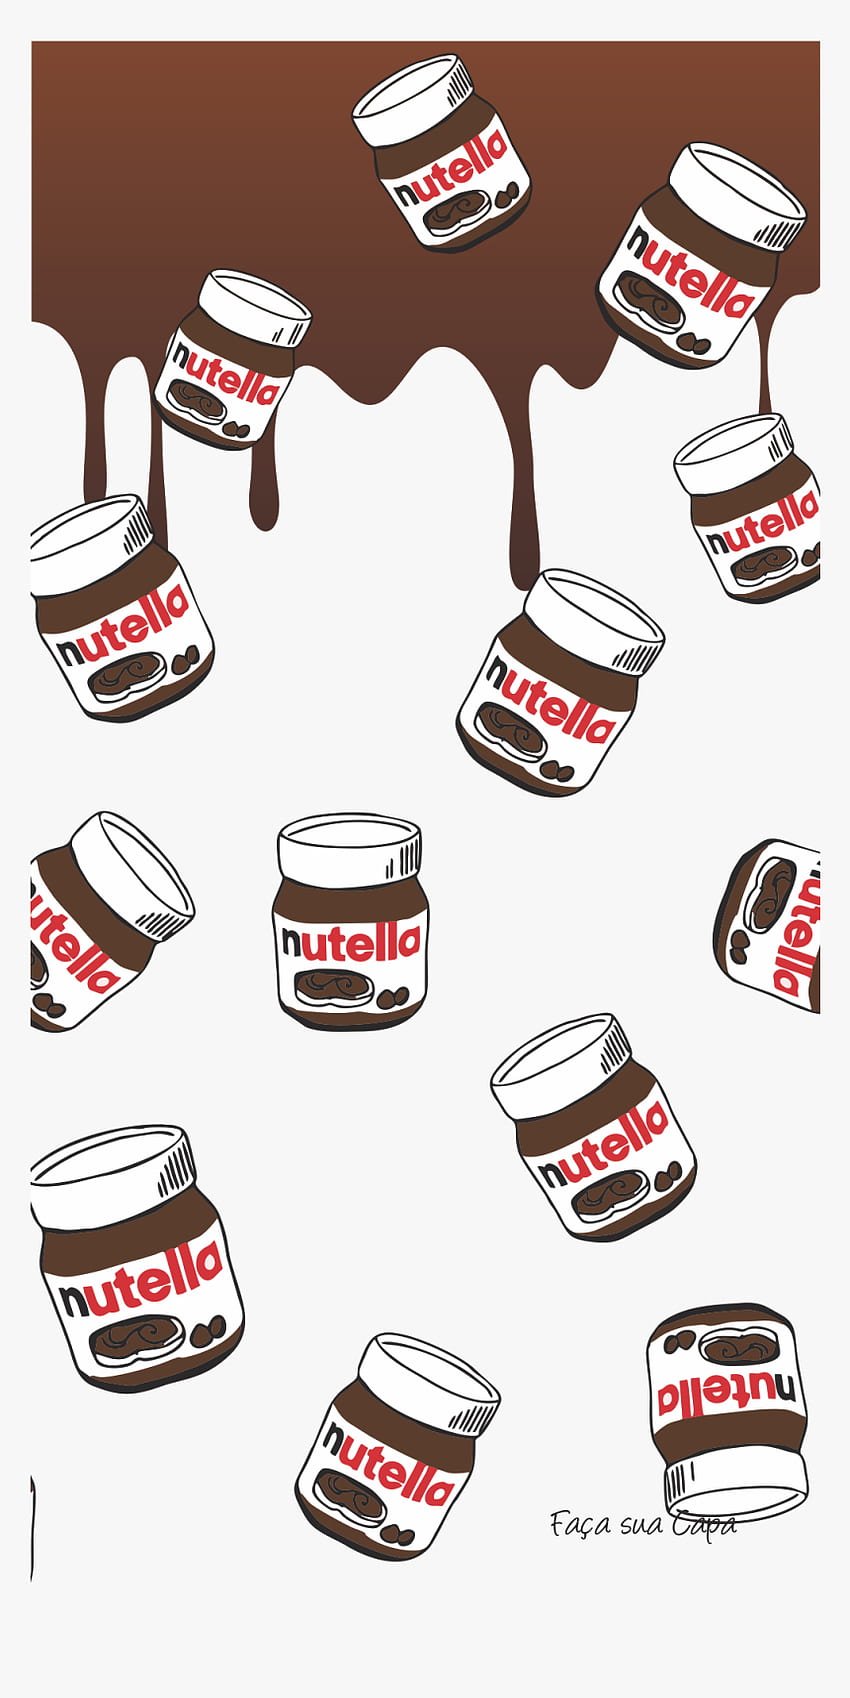 Nutella Cool iPhone Background, iPhone Food - Nutella Background, Png , Transparent Png, Nutella Tumblr HD phone wallpaper